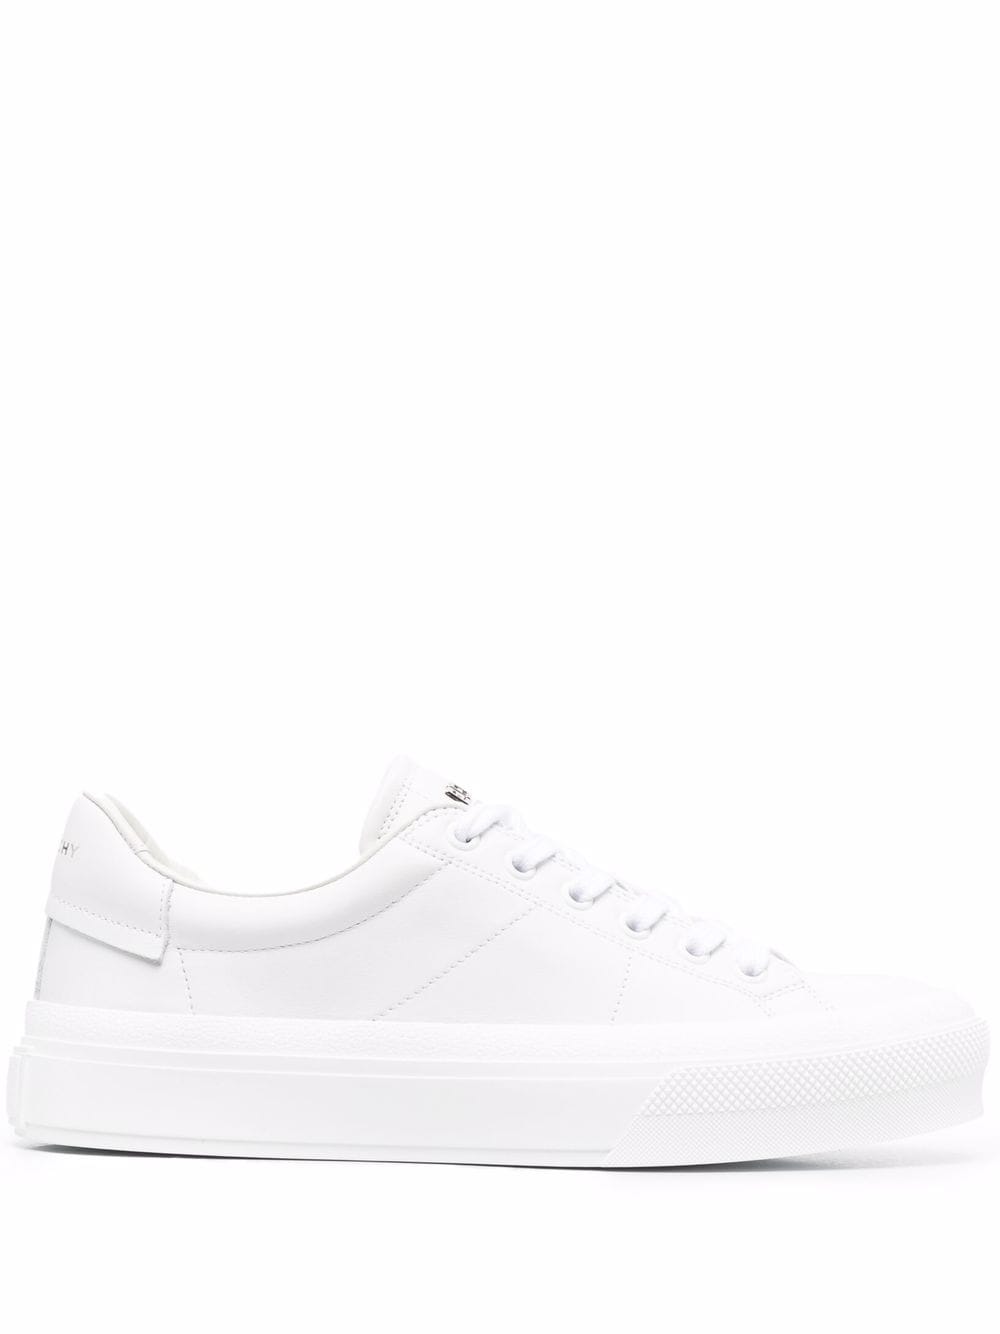 Givenchy 4G low-top sneakers - White von Givenchy